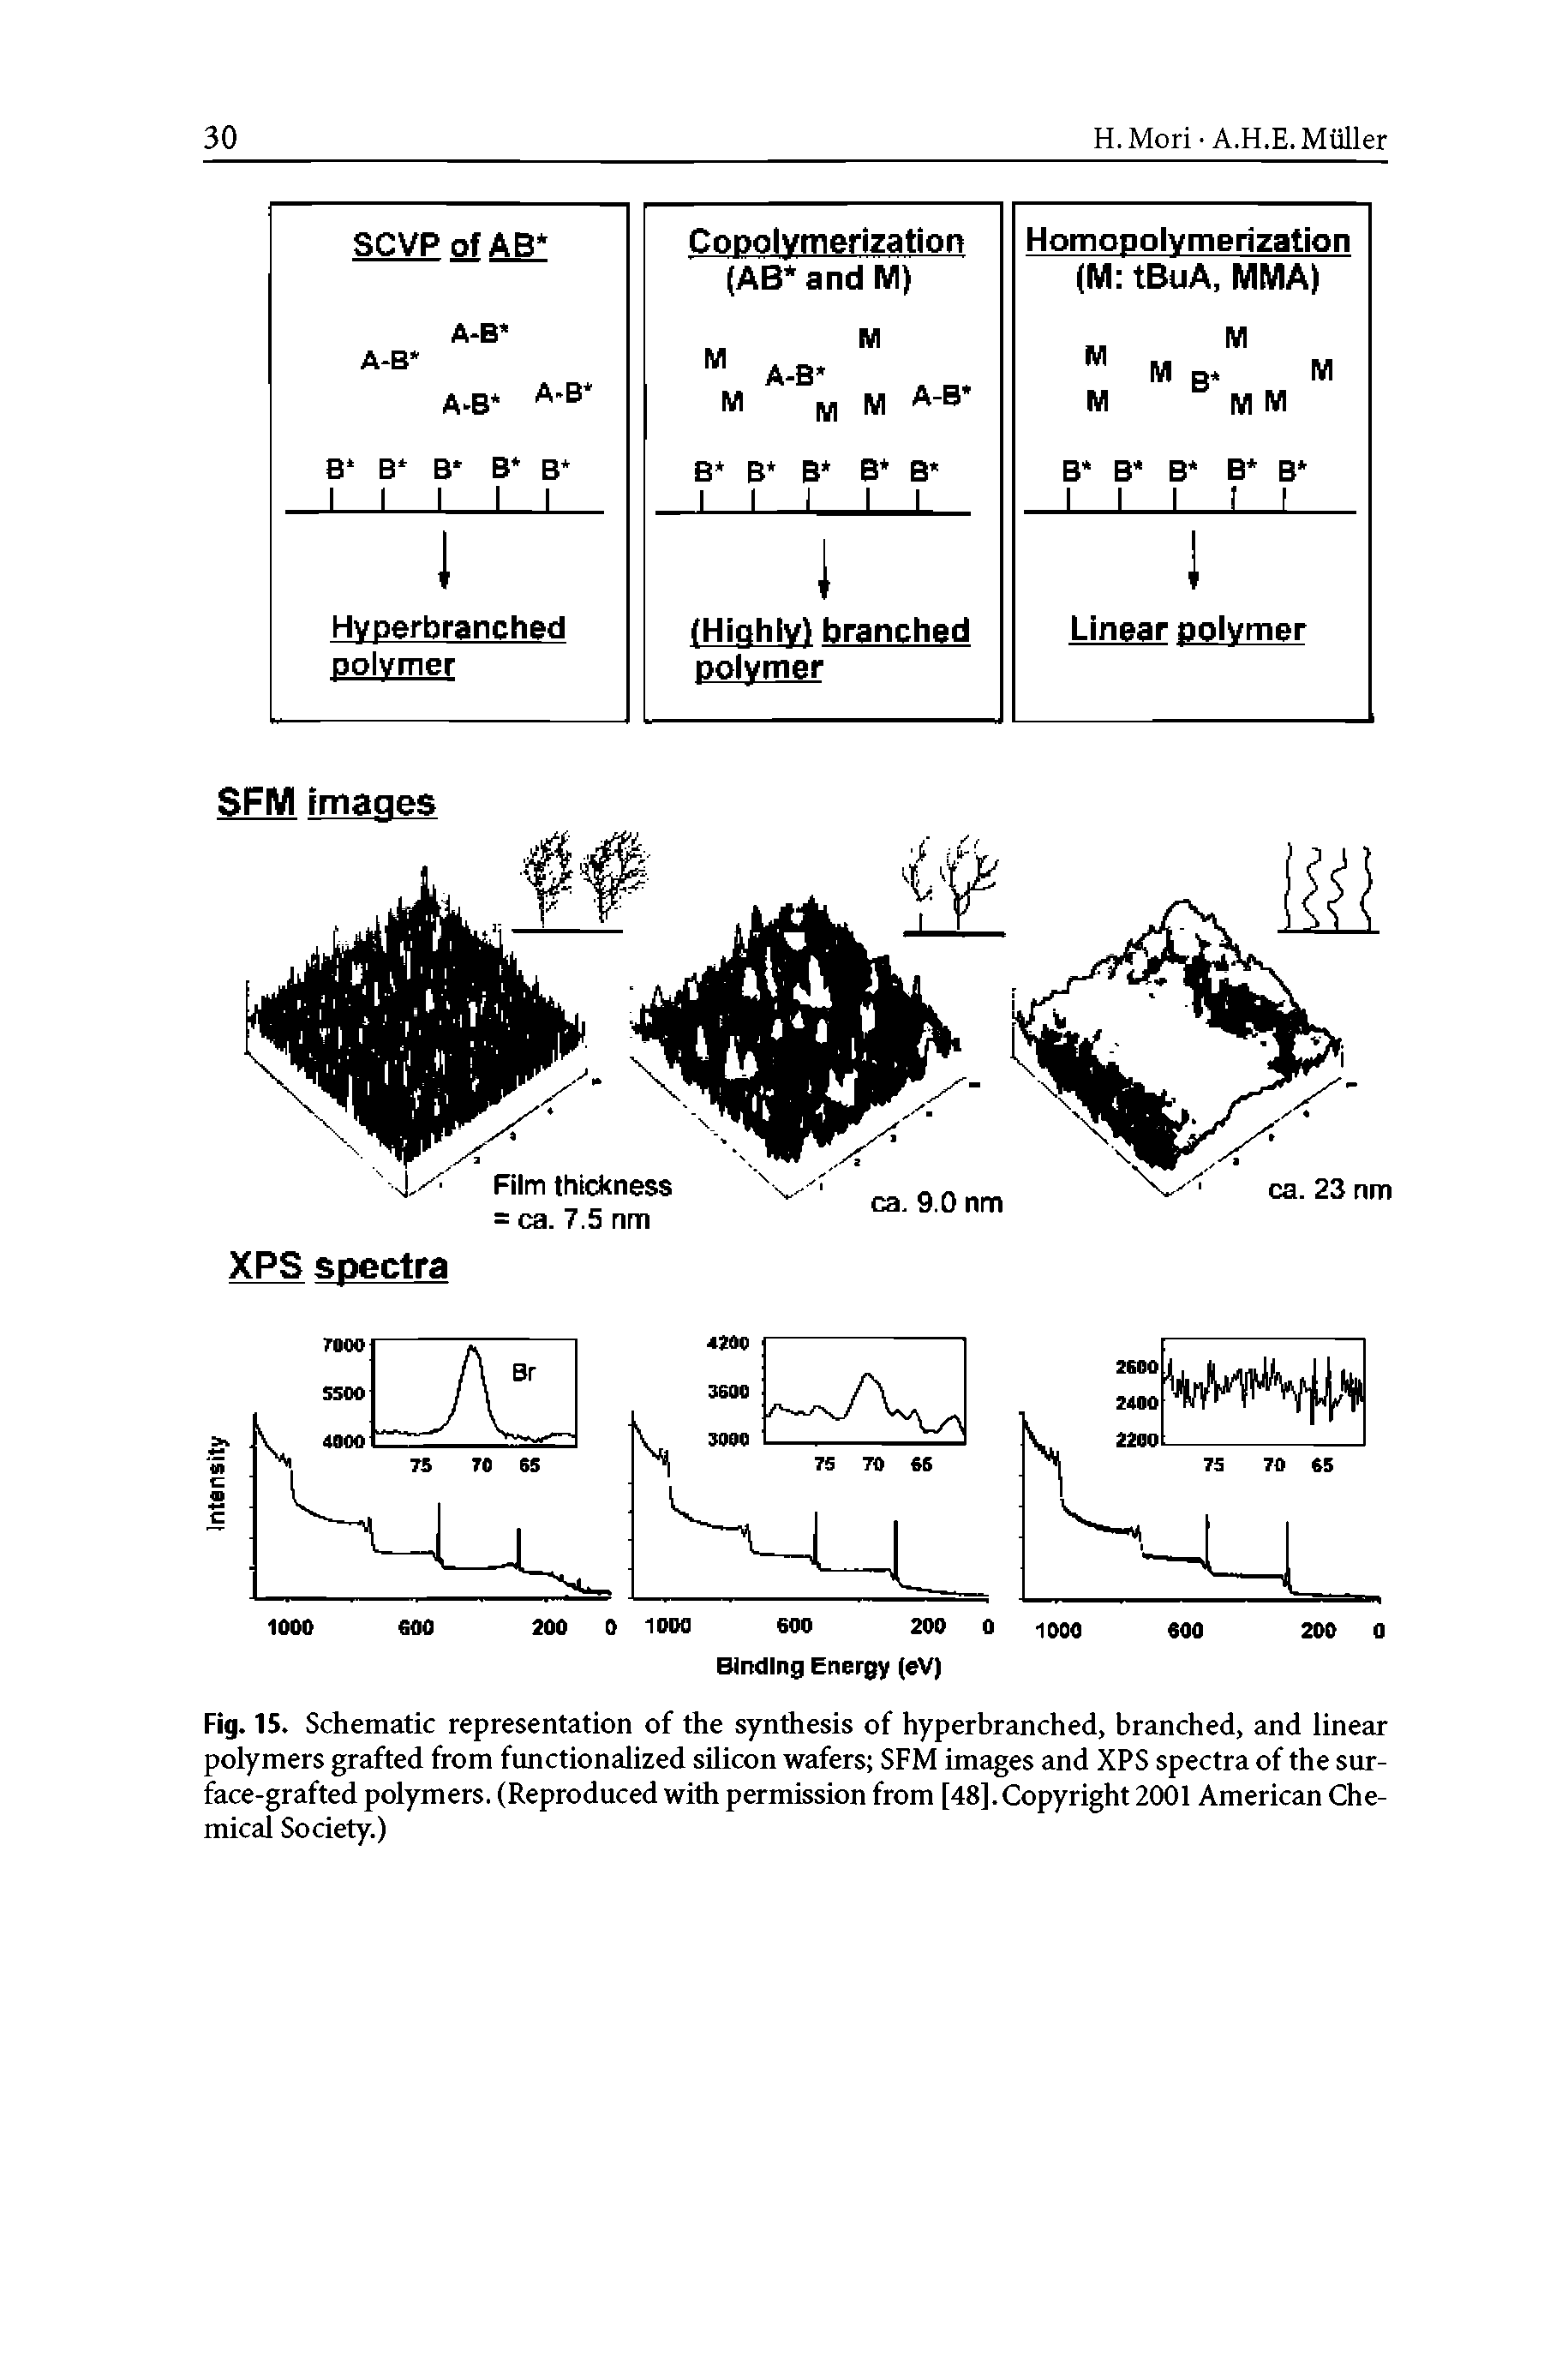 Fig. 15. Schematic representation of the synthesis of hyperbranched, branched, and linear polymers grafted from functionalized silicon wafers SFM images and XPS spectra of the surface-grafted polymers. (Reproduced with permission from [48],Copyright 2001 American Chemical Society.)...